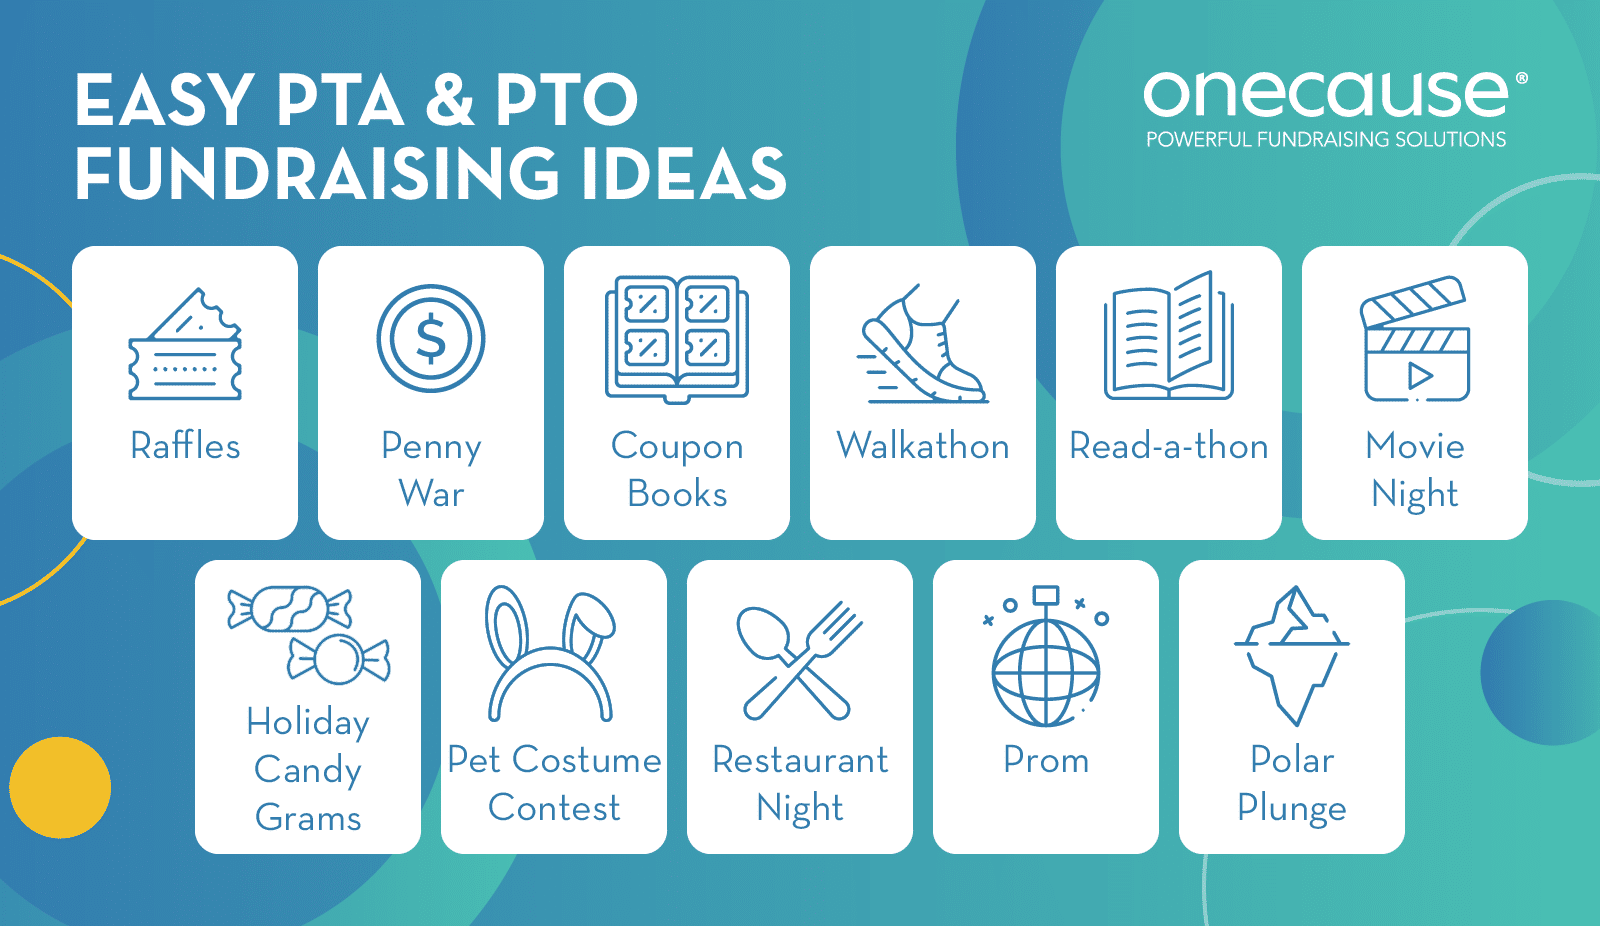 A list of easy PTO and PTA fundraising ideas, also described in the text below.